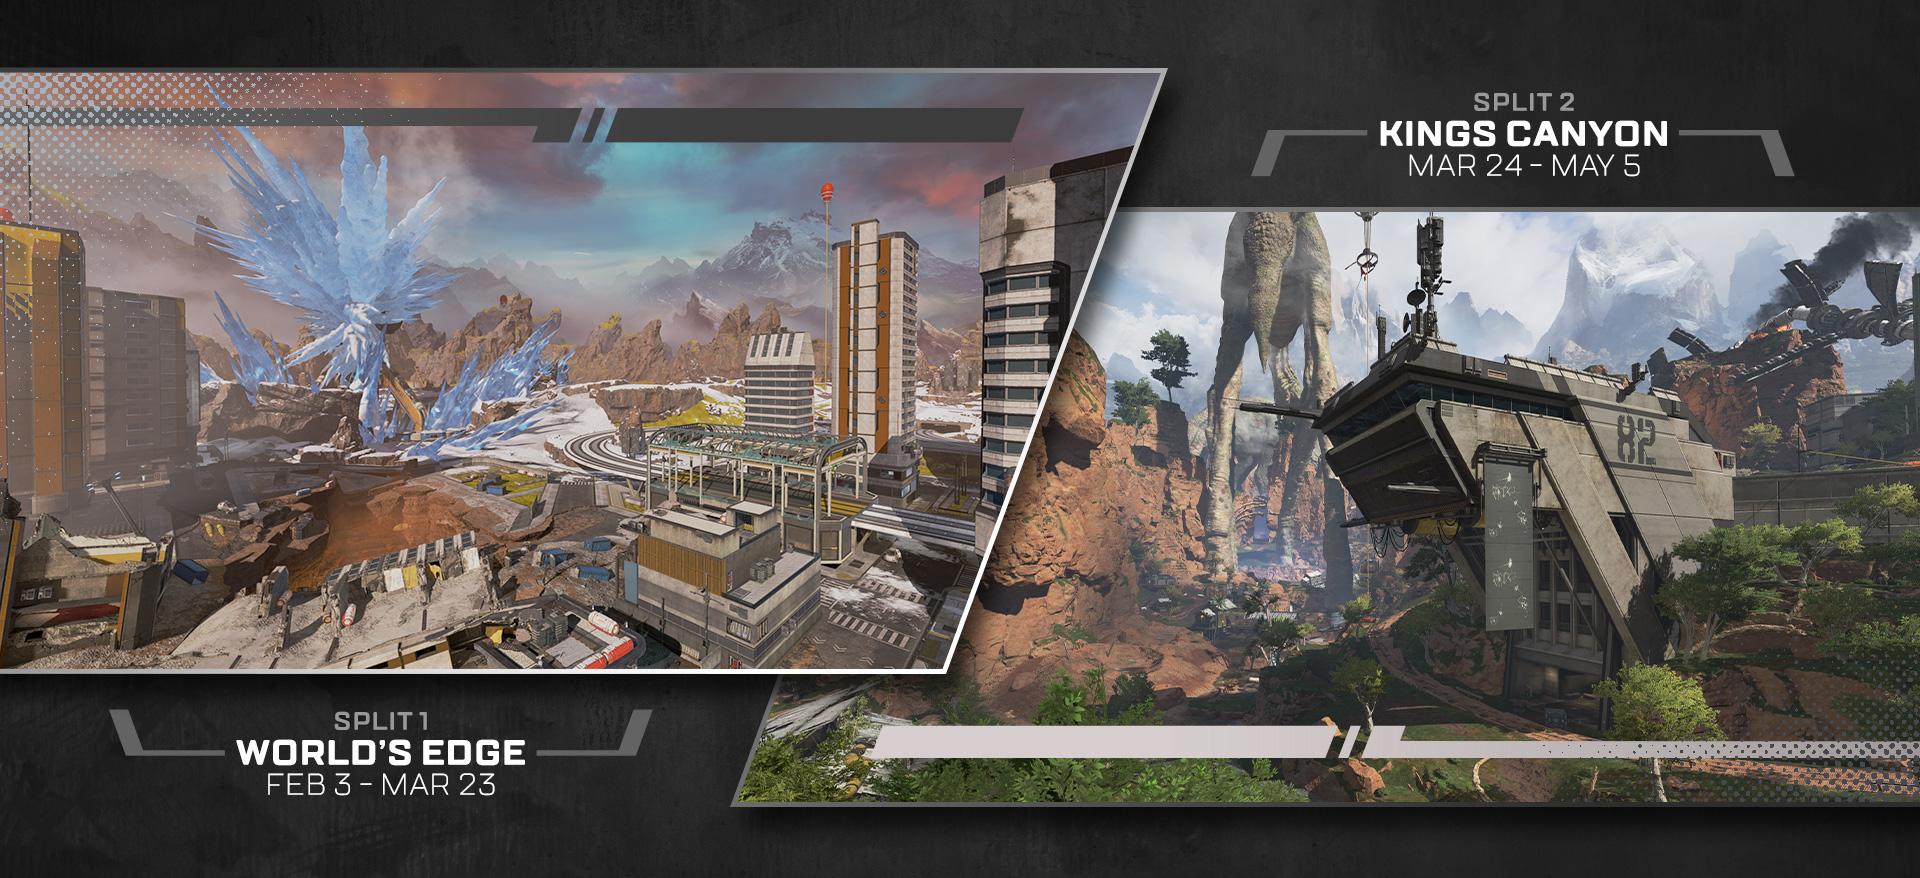 Apex Legends' World's Edge and Kings Canyon.